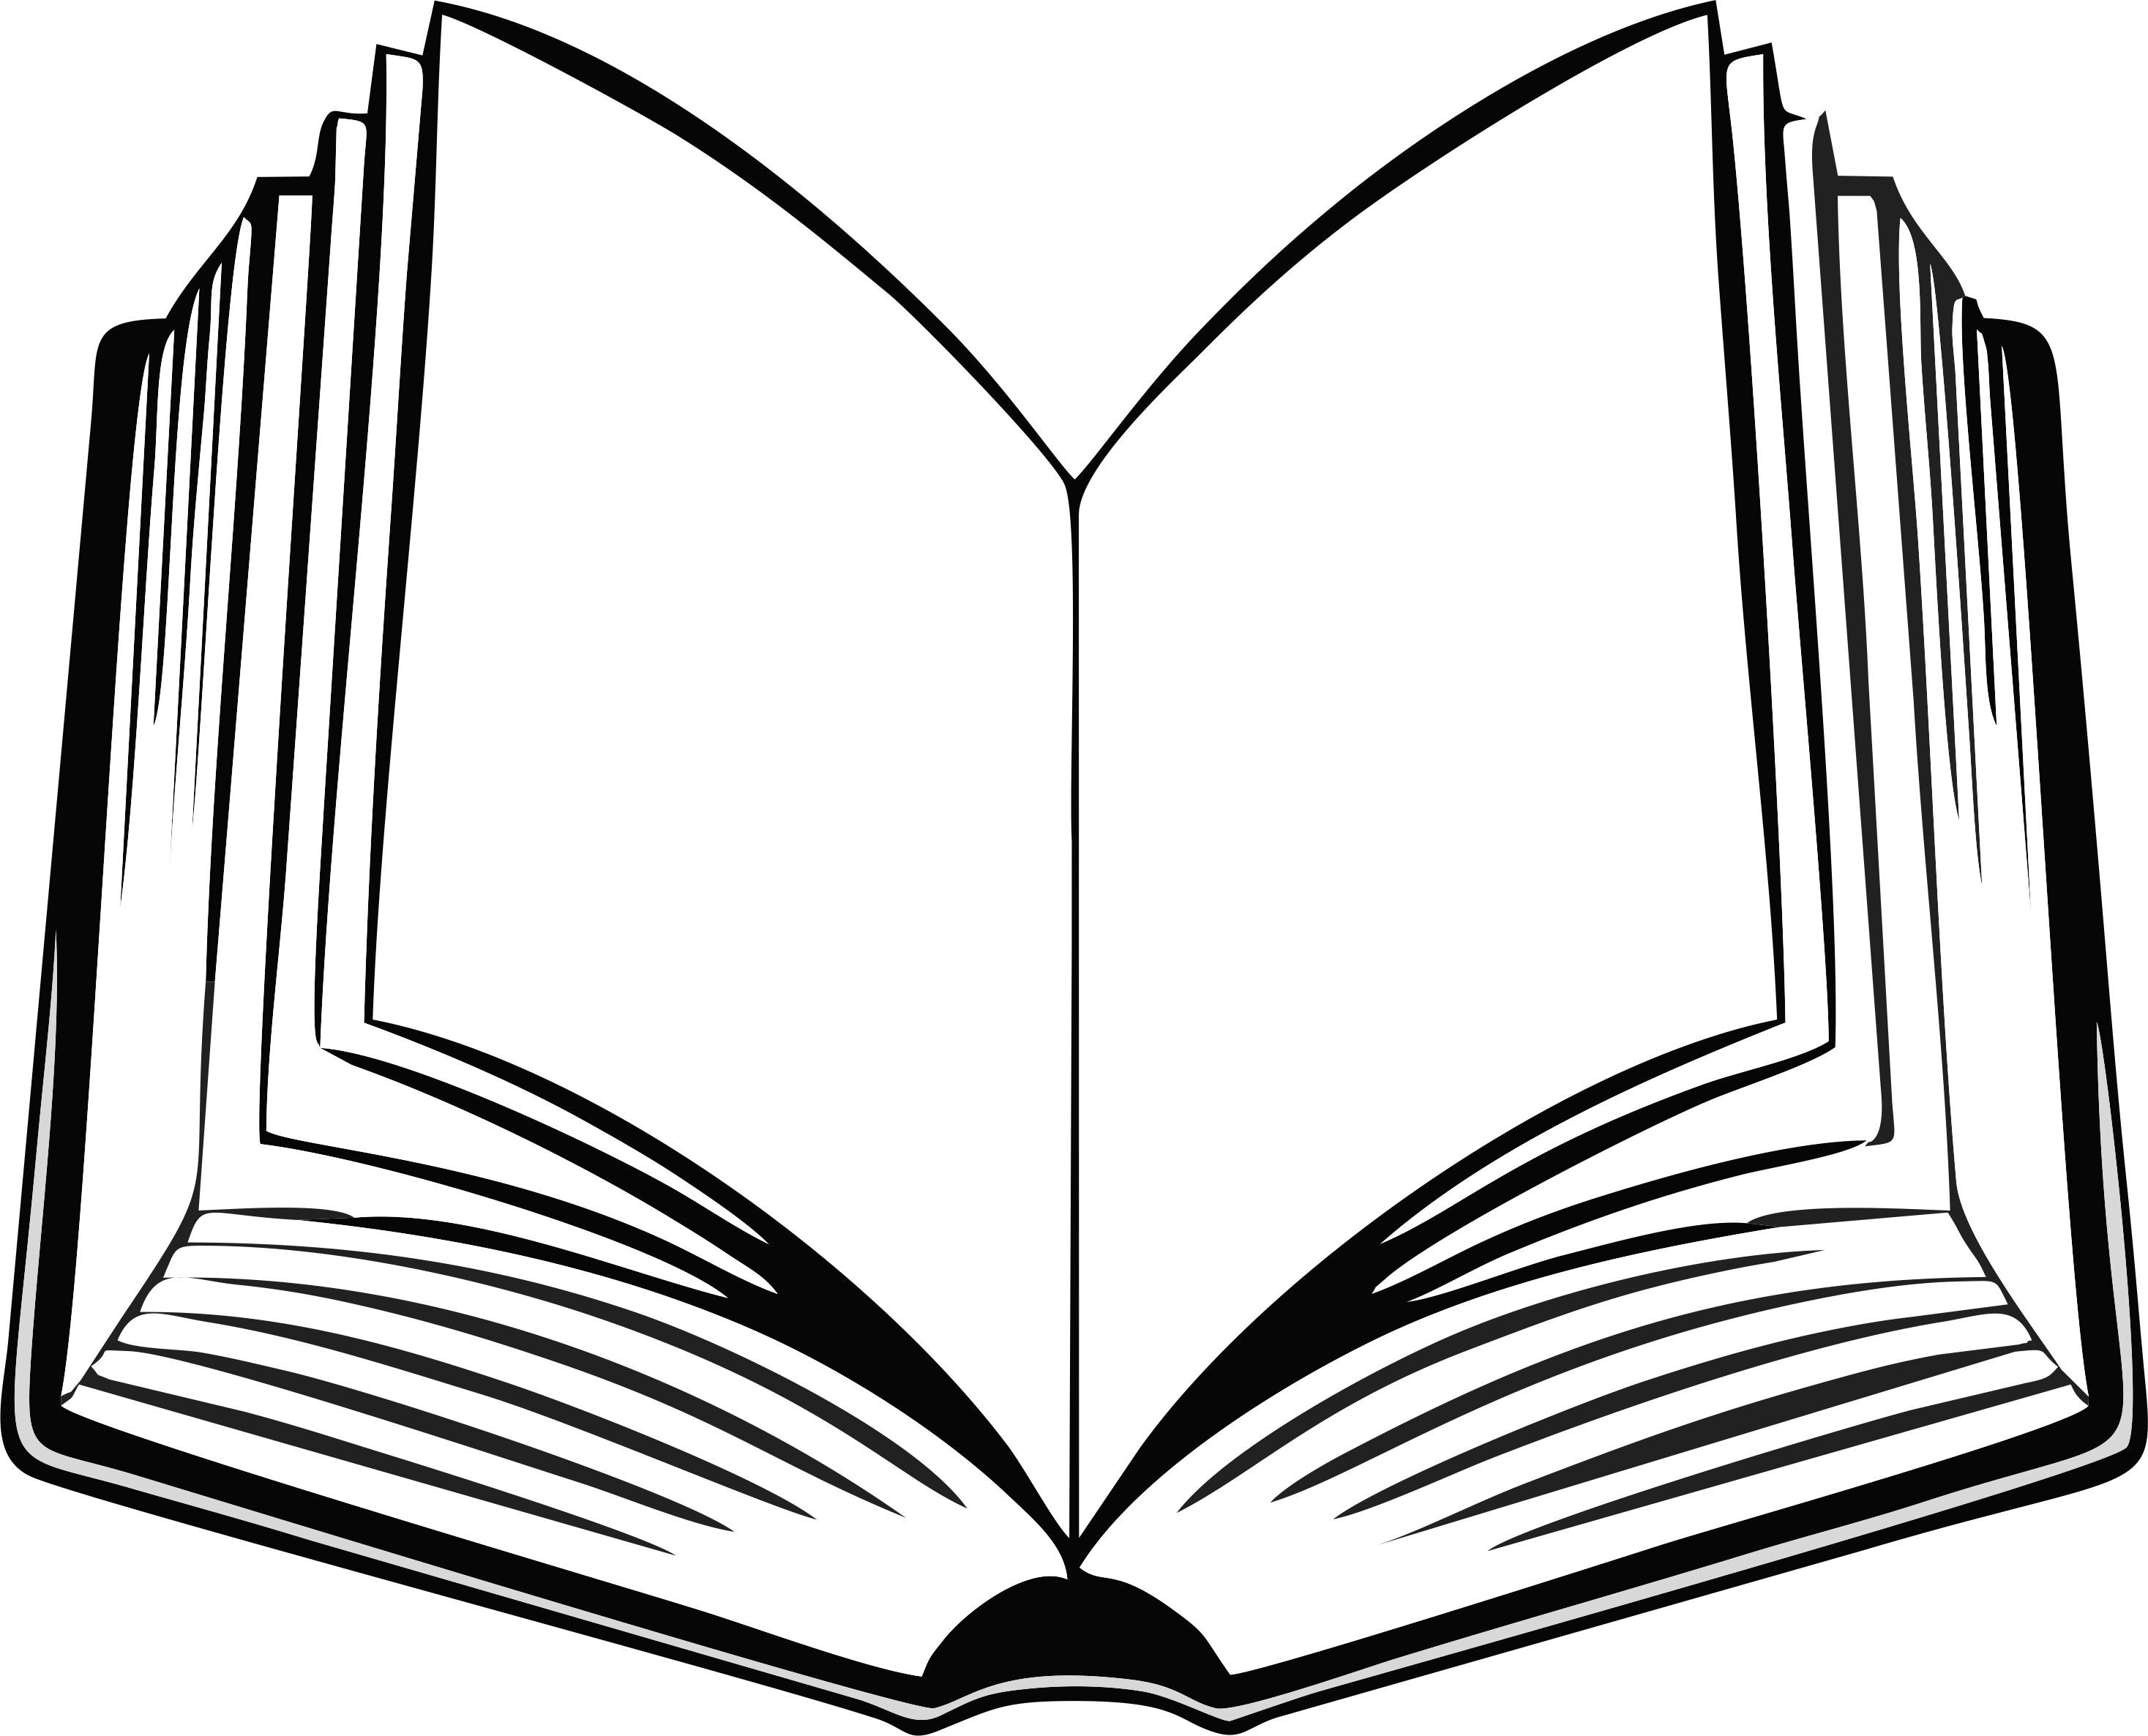 book-cover-outline-clip-art-book-png-download-2935-2372-free